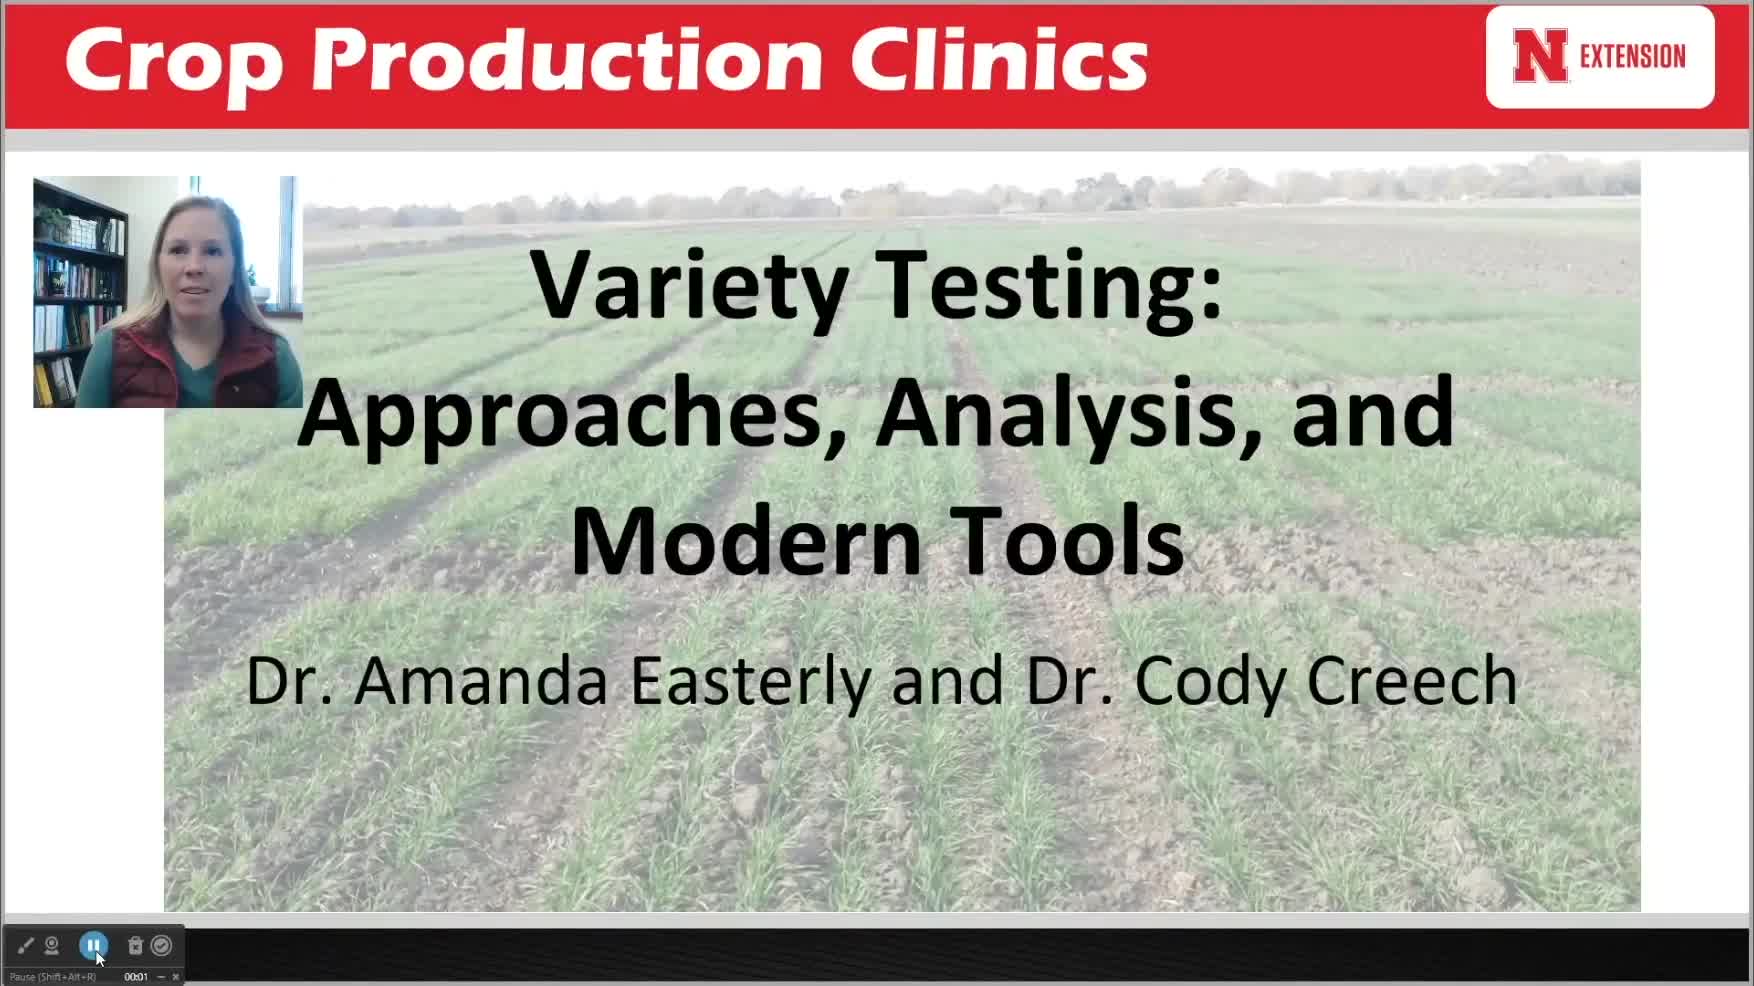 Variety Testing: Approaches, Analysis, and Modern Tools